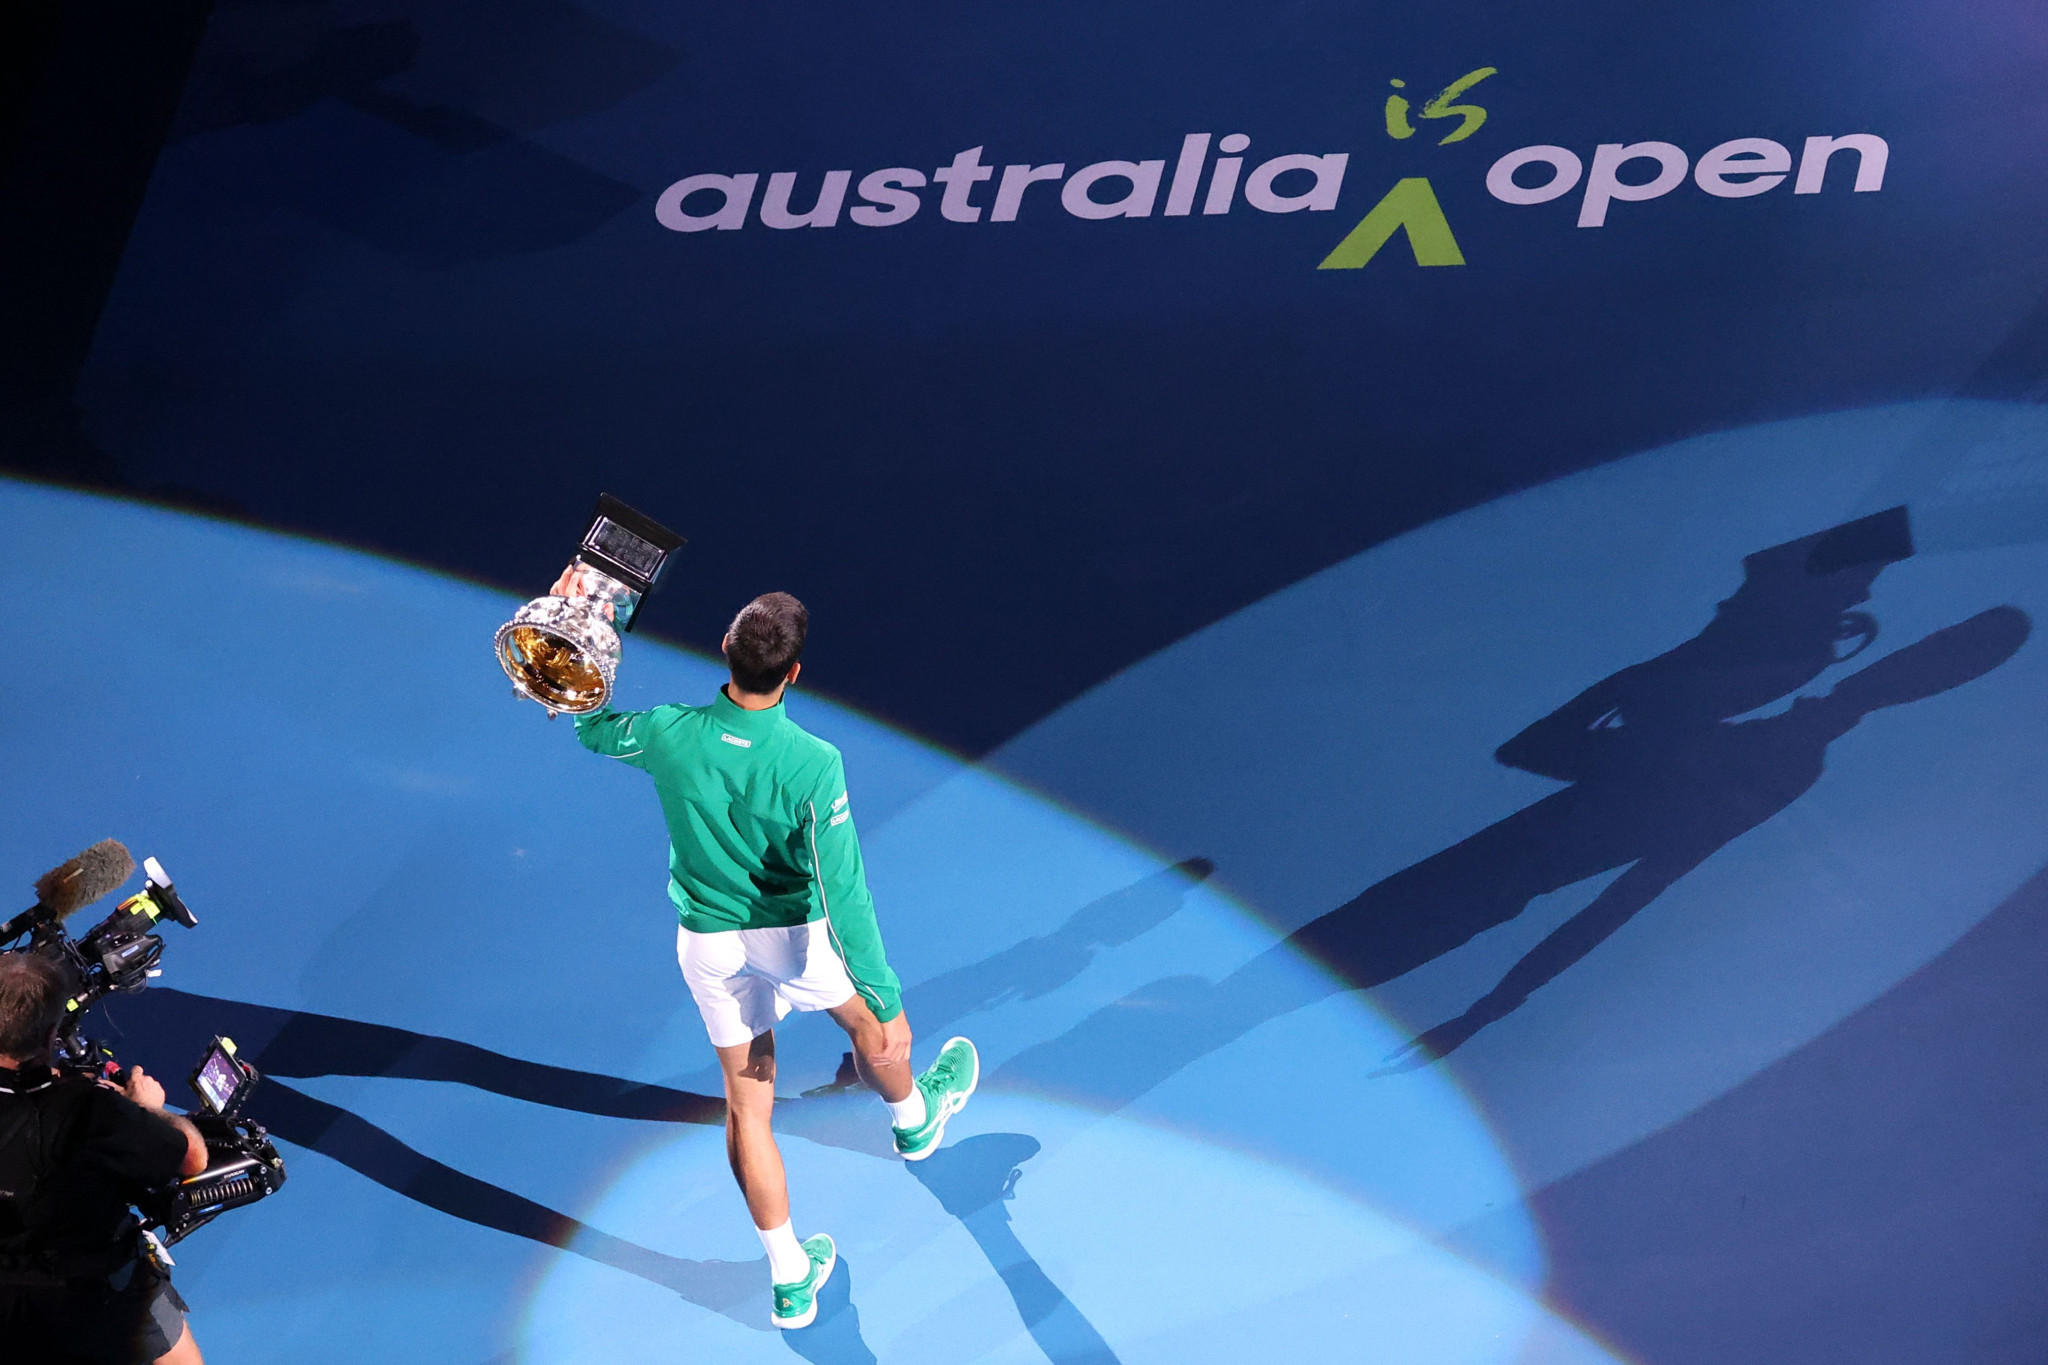 Tennis Australia expect the Australian Open to take place in Melbourne as planned ©Getty Images